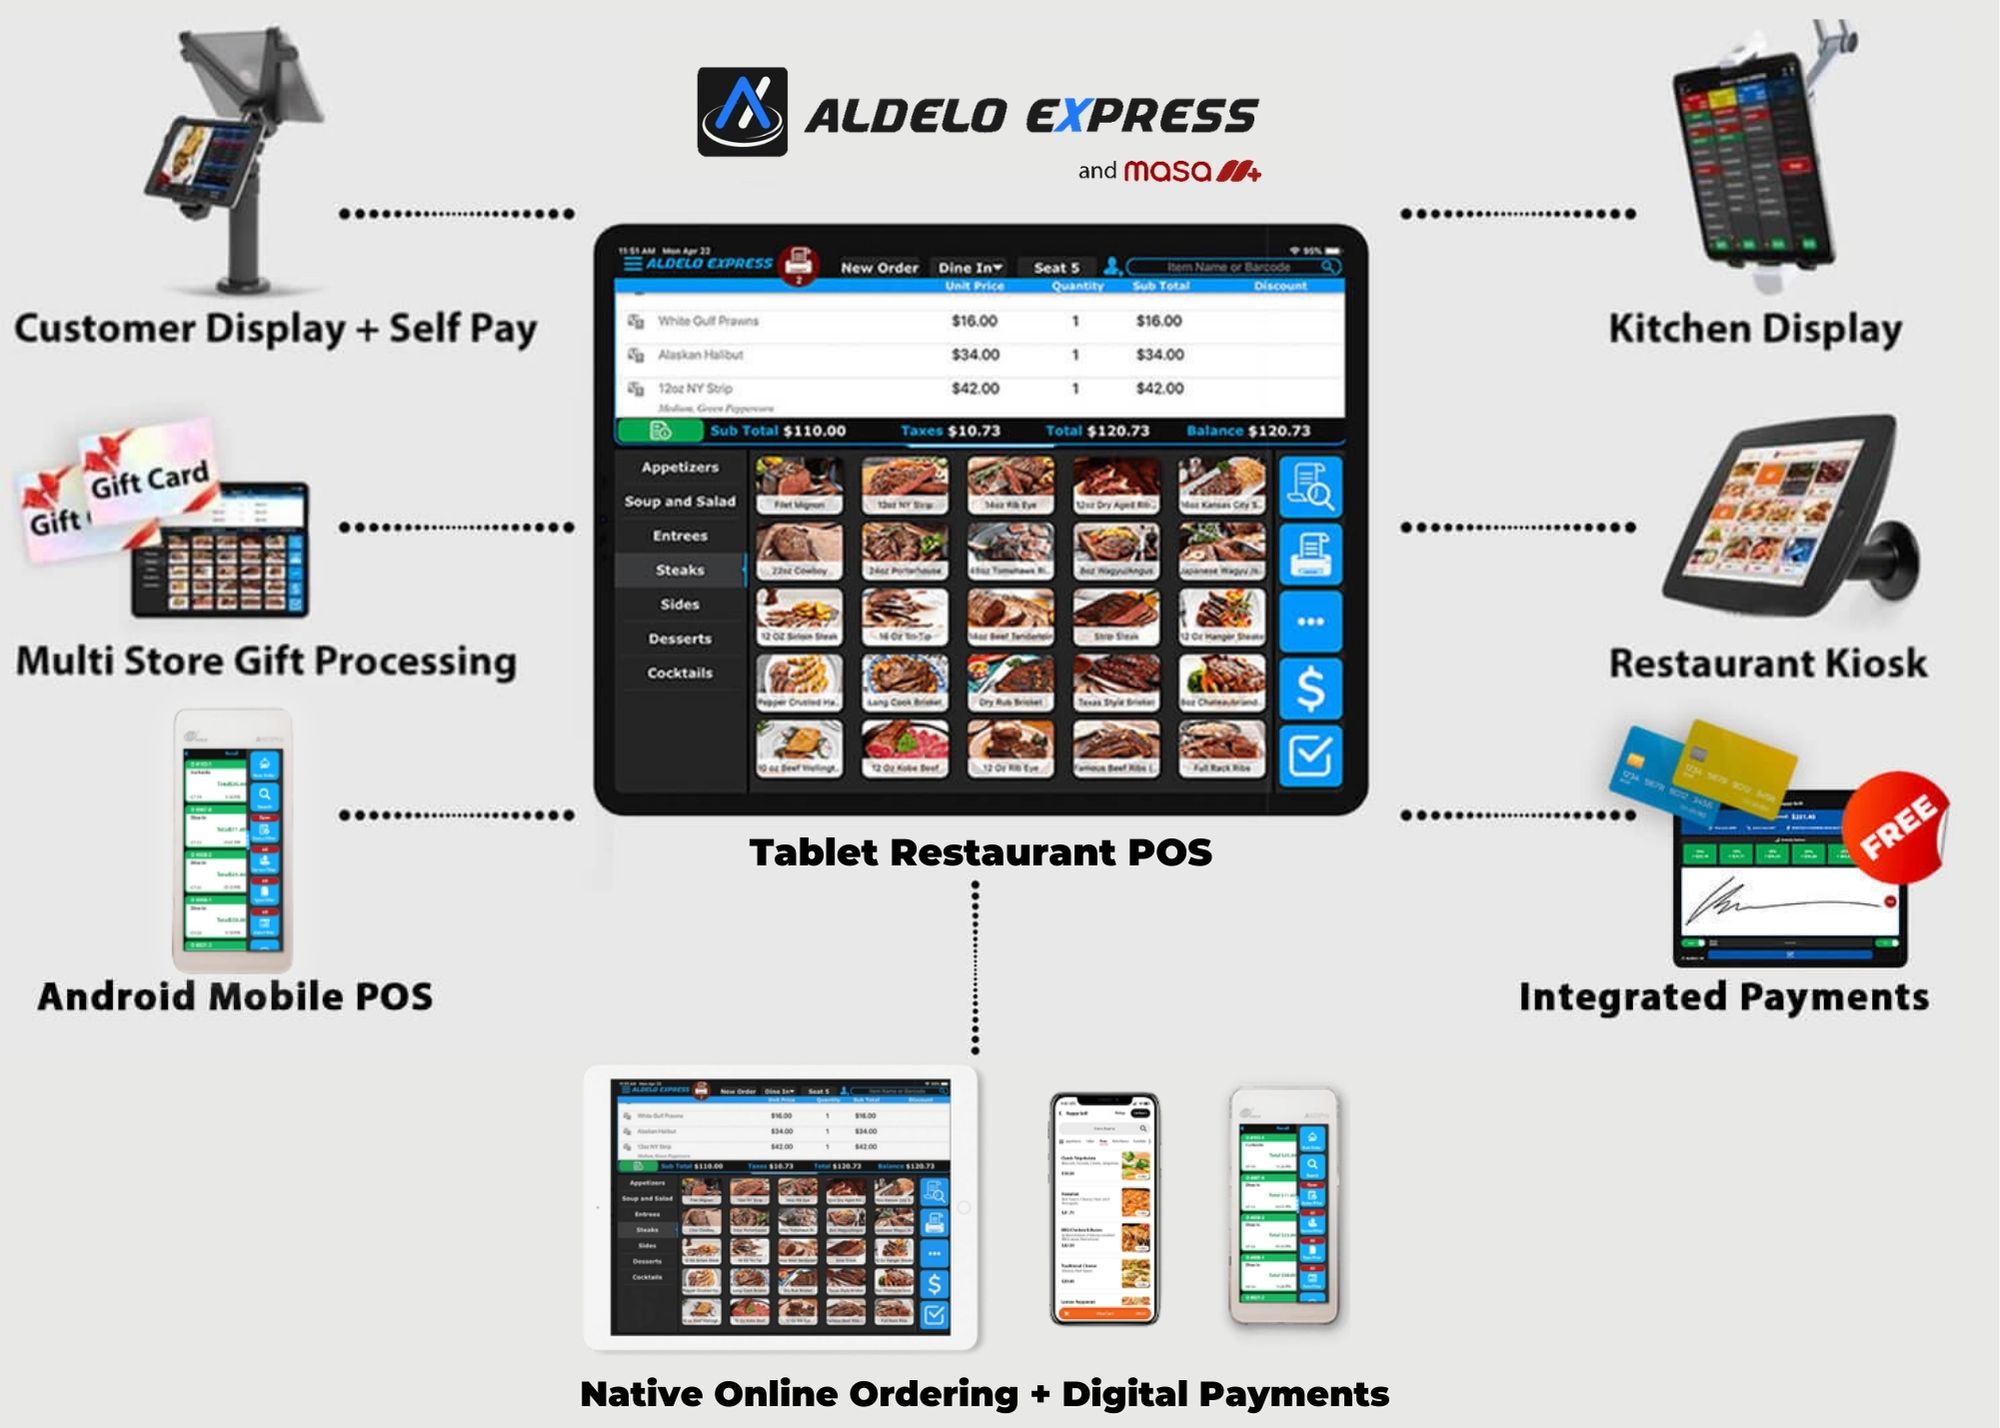 Efficient and powerful merchant-facing and customer-facing cloud point-of-sale solutions